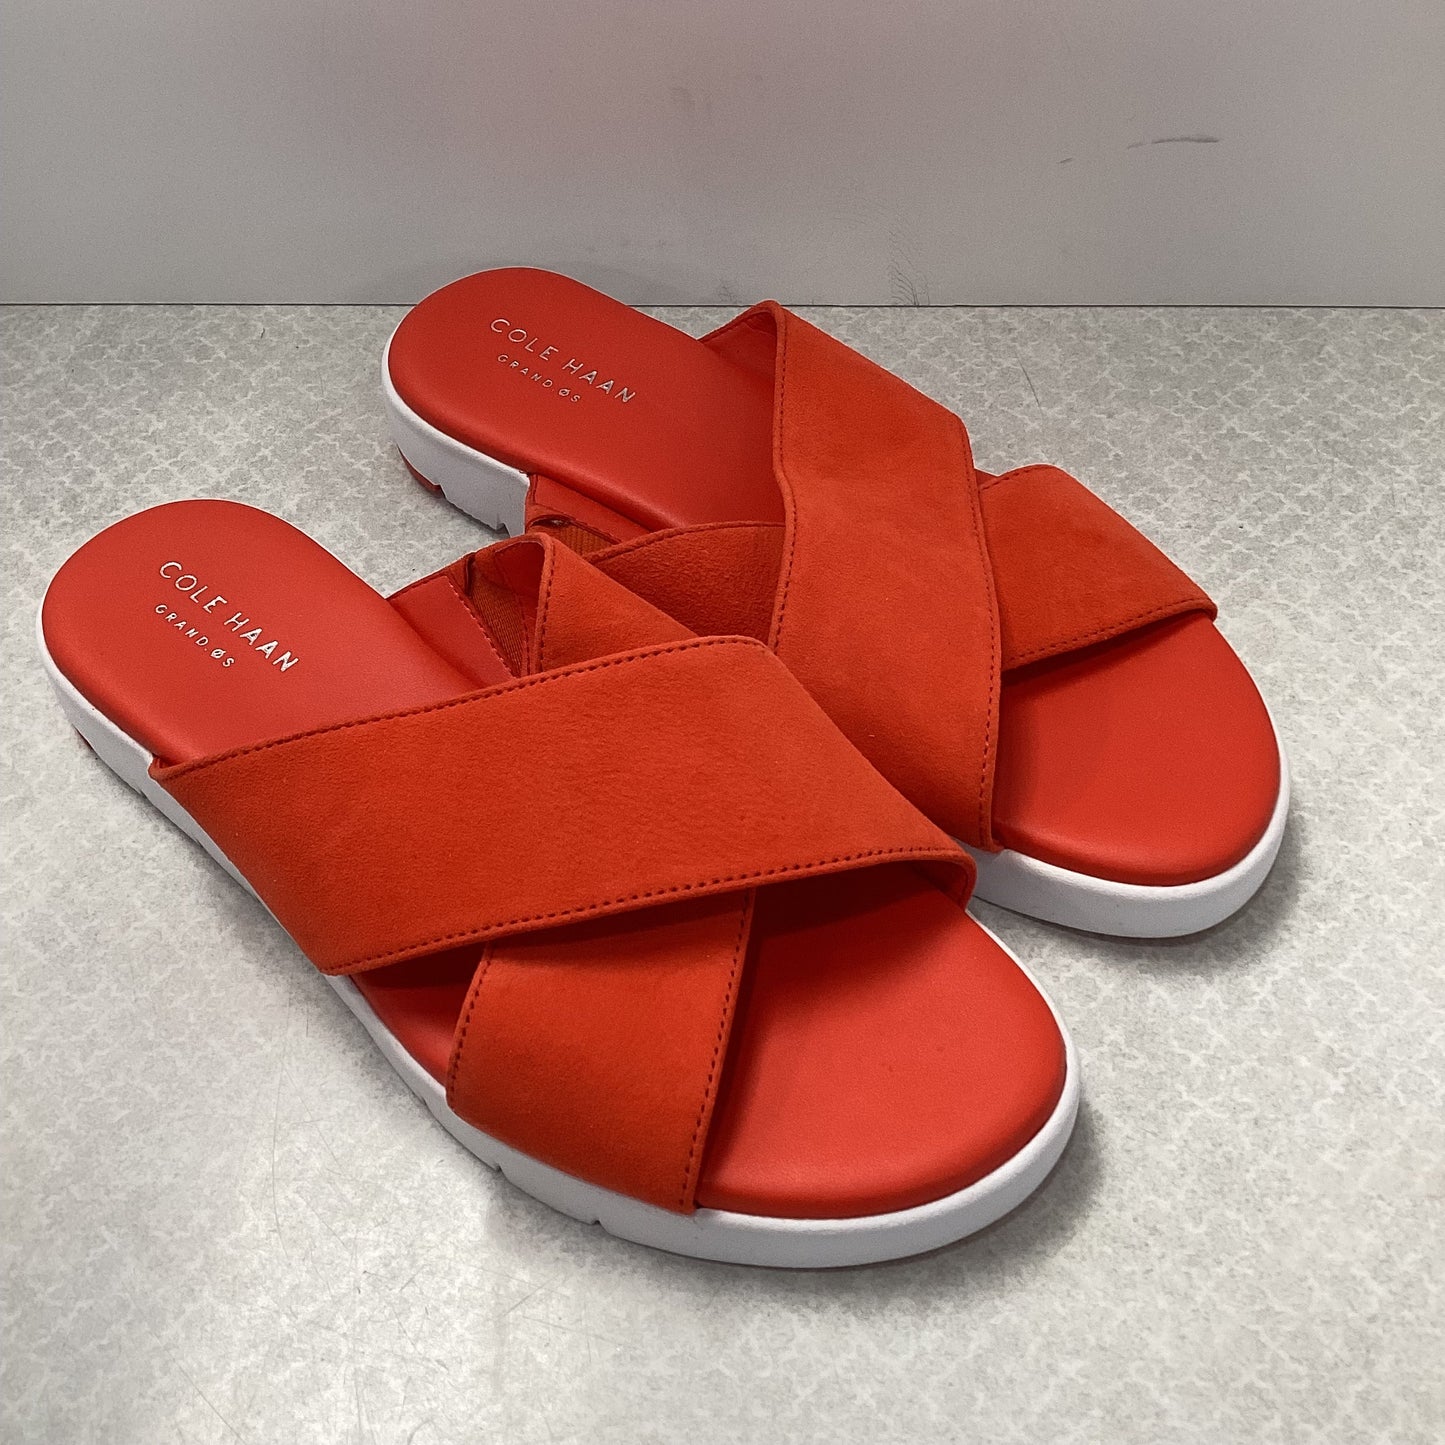 Sandals Flats By Cole-haan  Size: 6.5